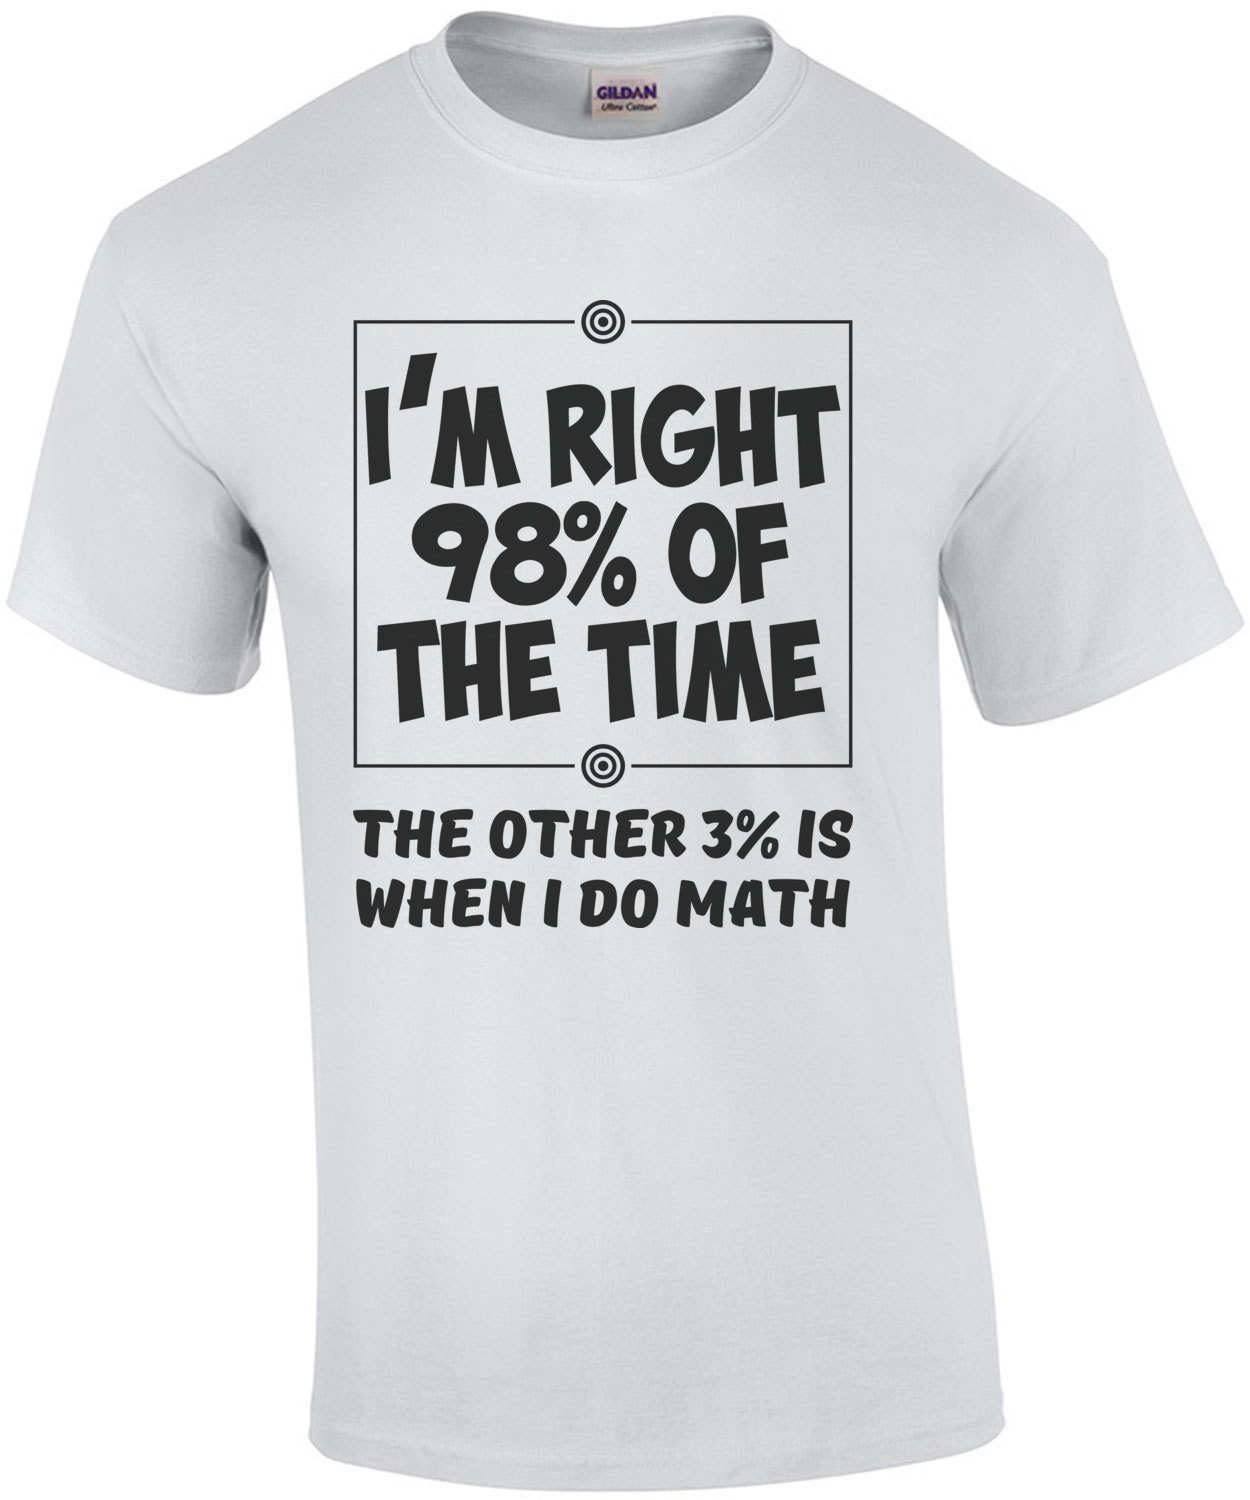 I'm Right 98% Of The Time The Other 3% Is When I Do Math